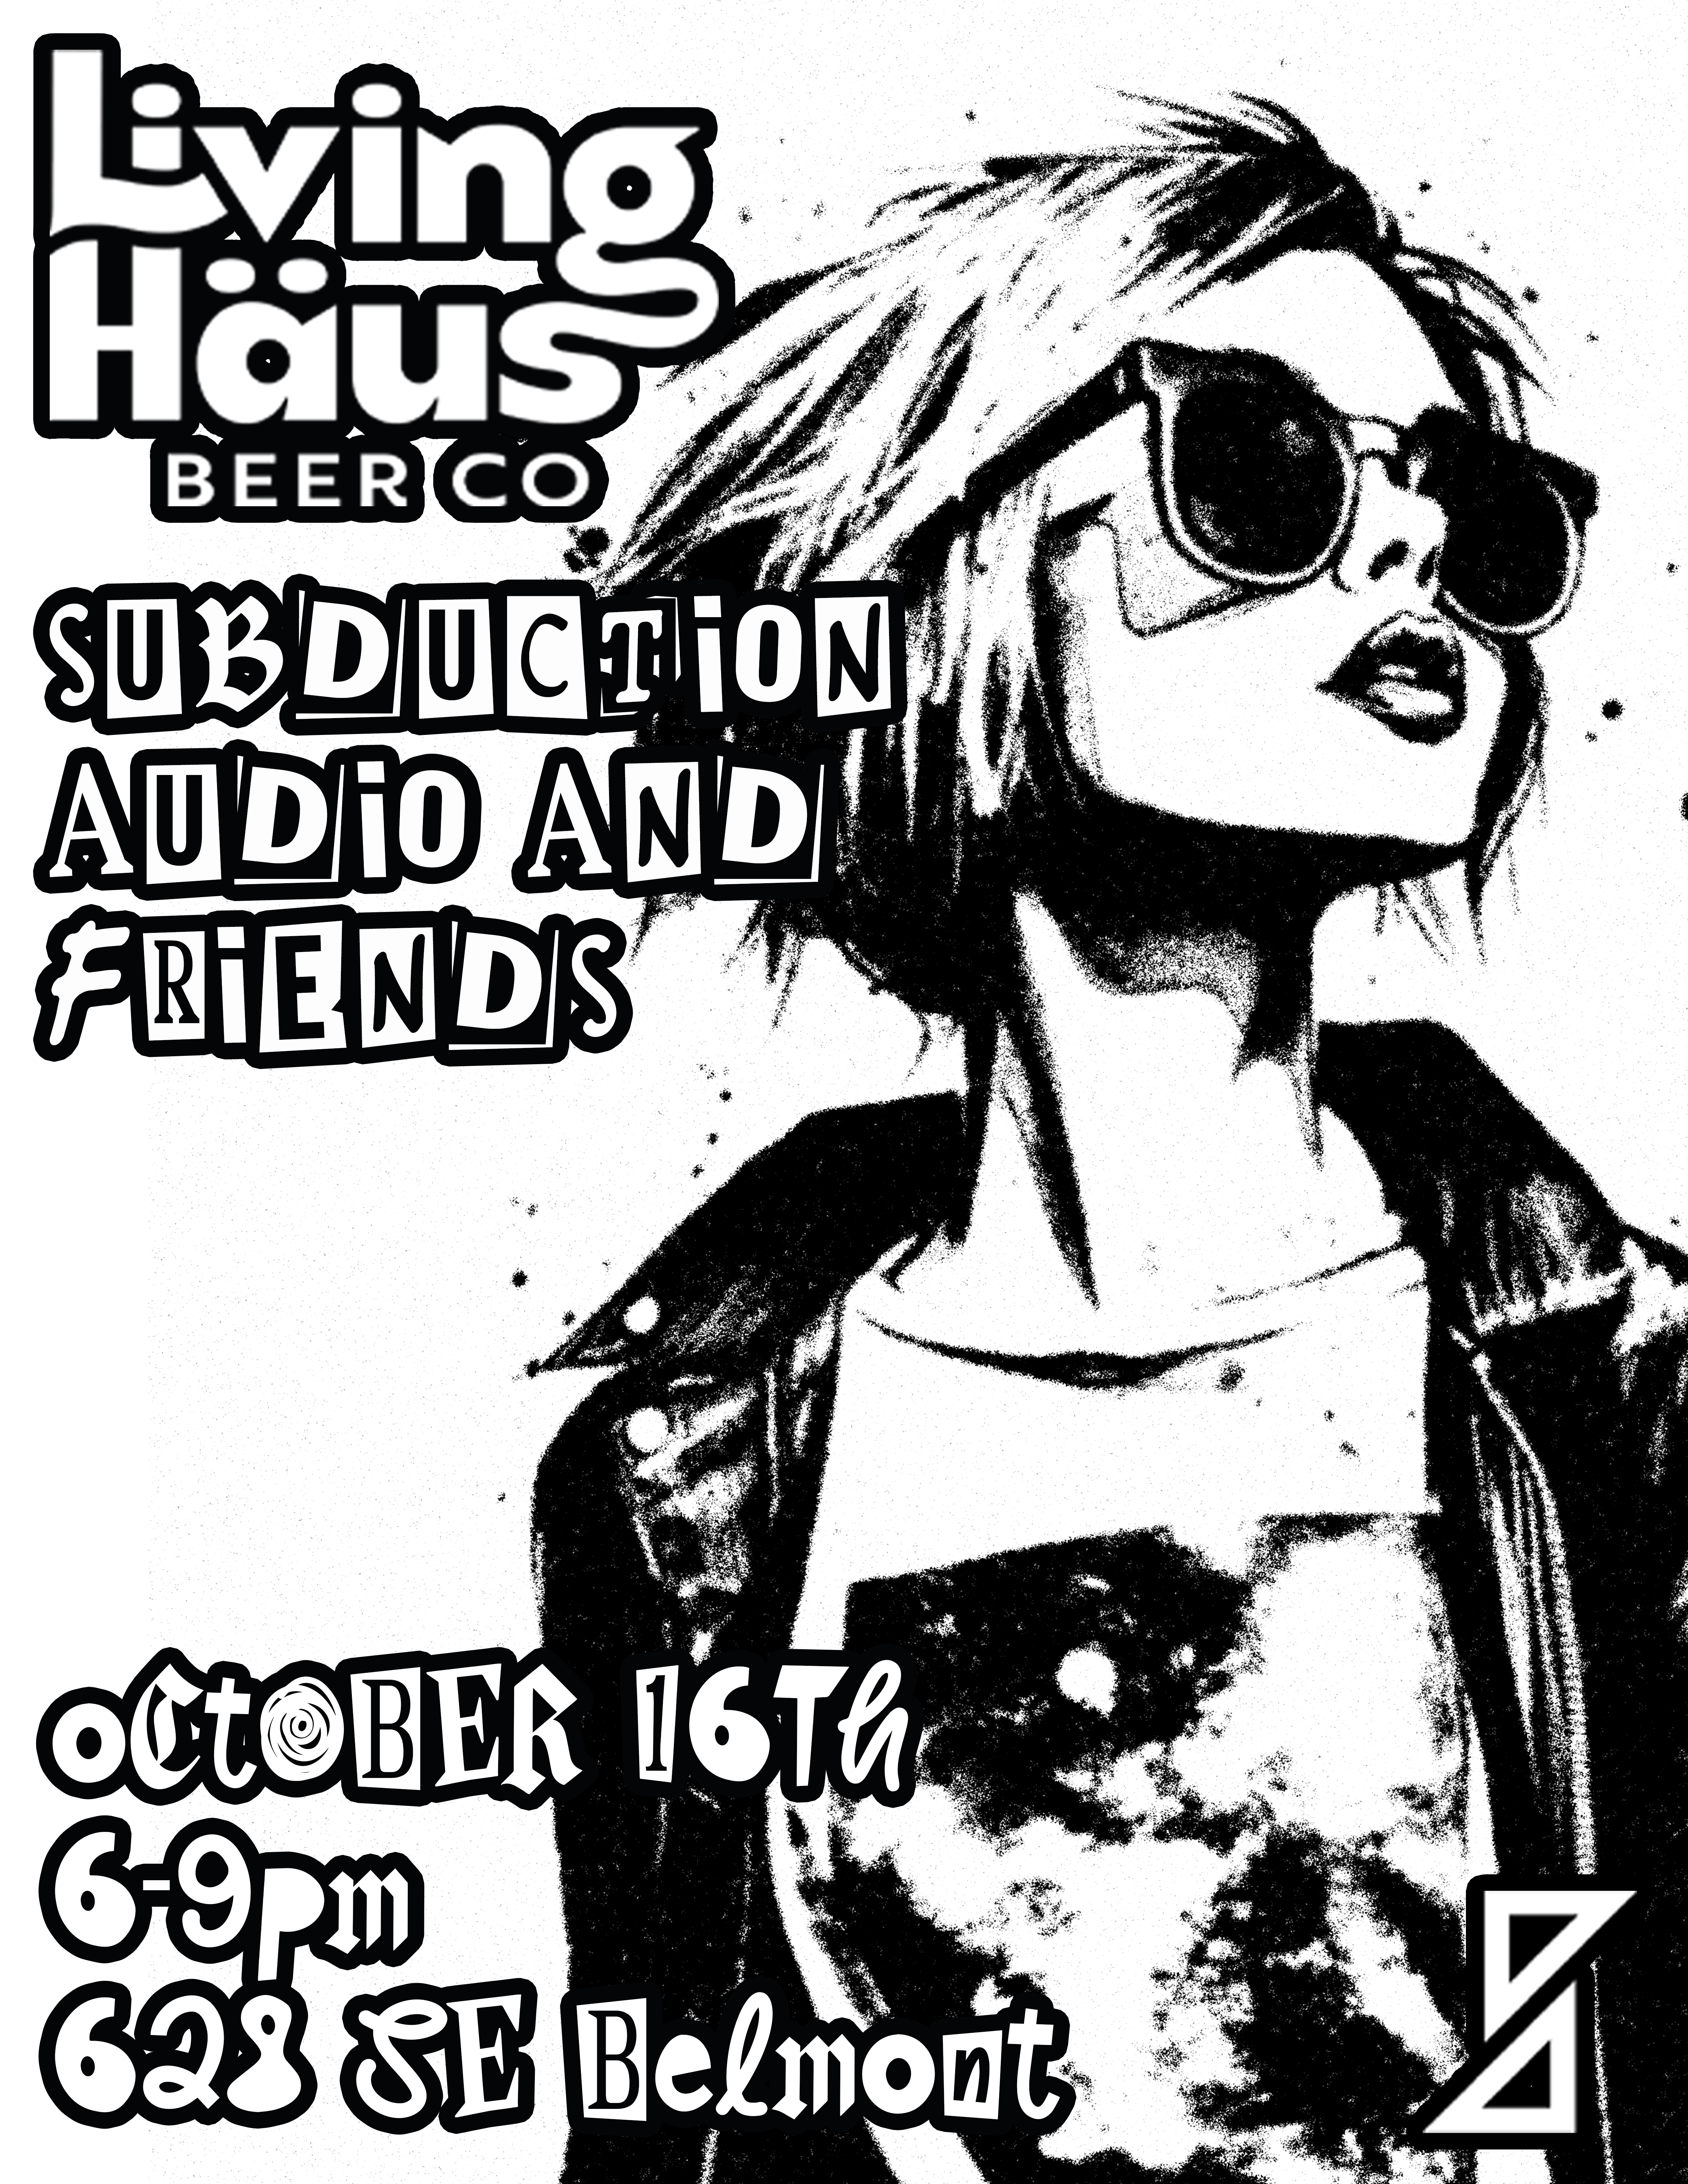 Subduction Audio and Friends 14